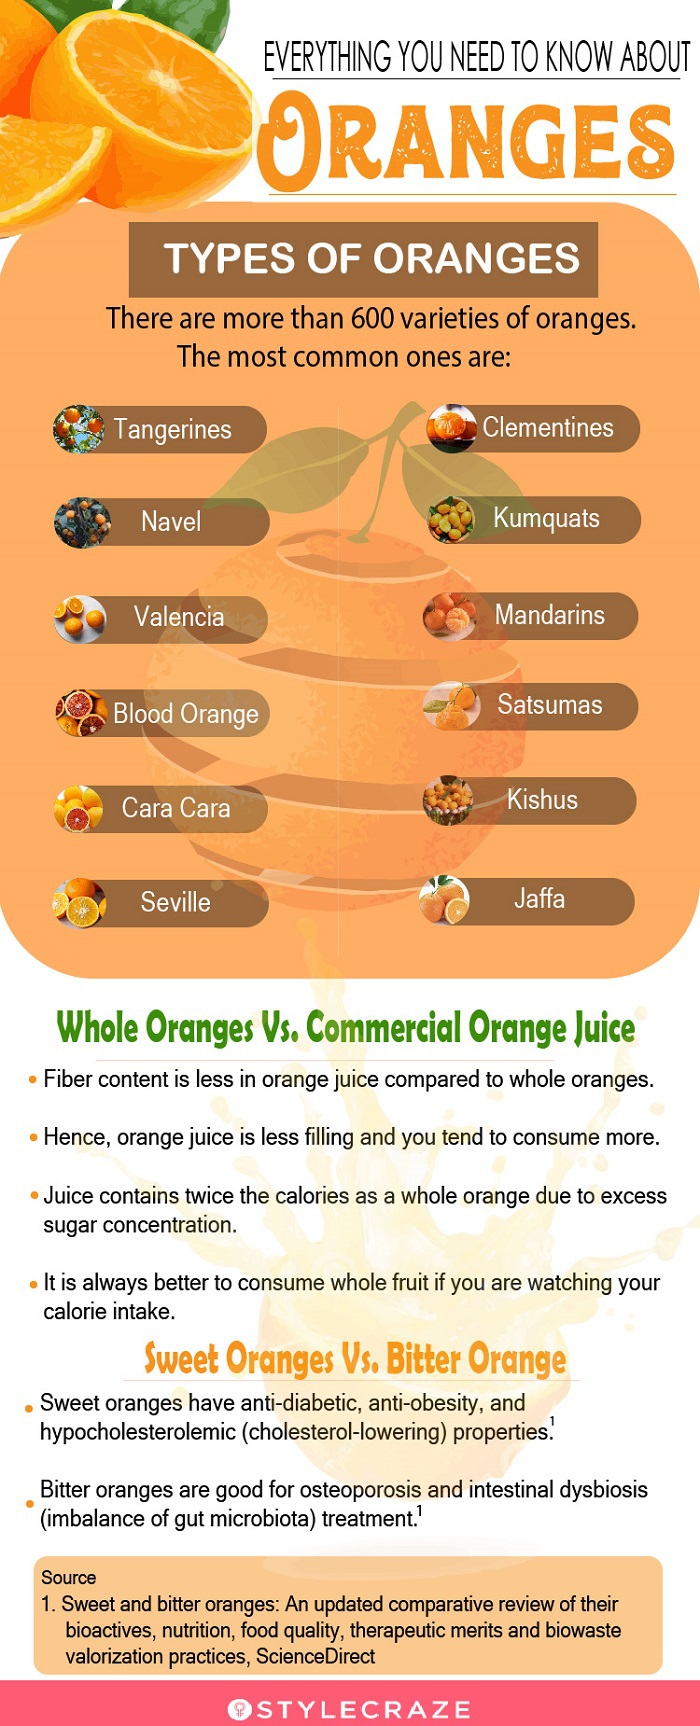 everything you need to know about oranges (infographic)